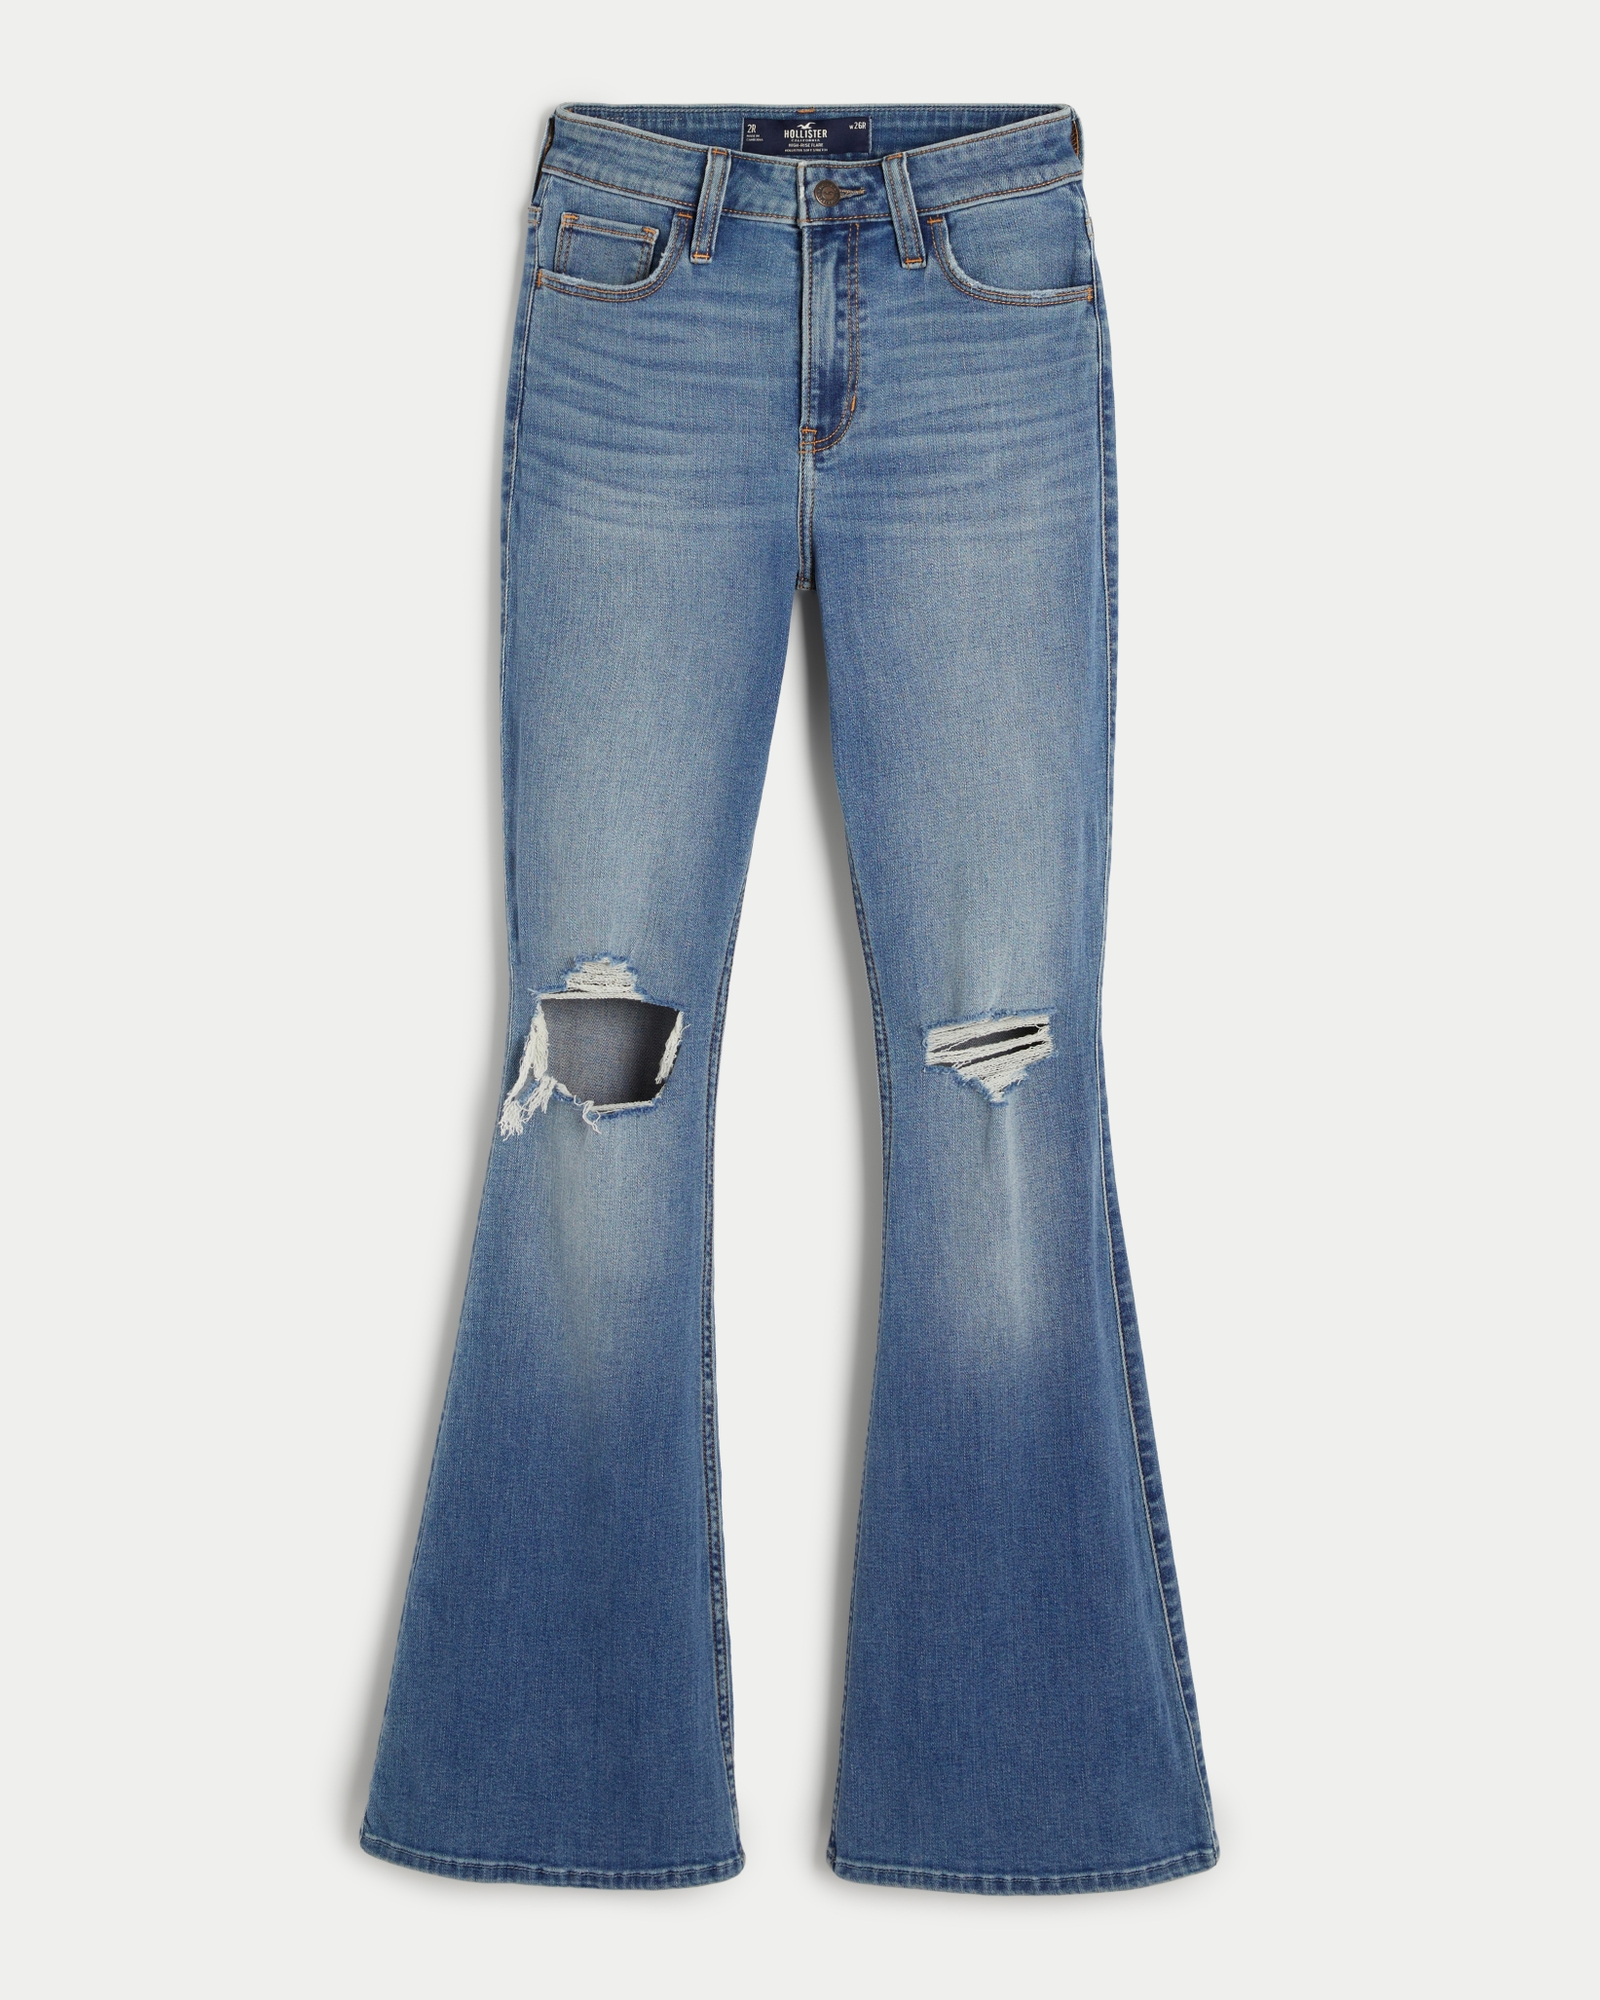 Women's High-Rise Ripped Medium Wash Flare Jeans